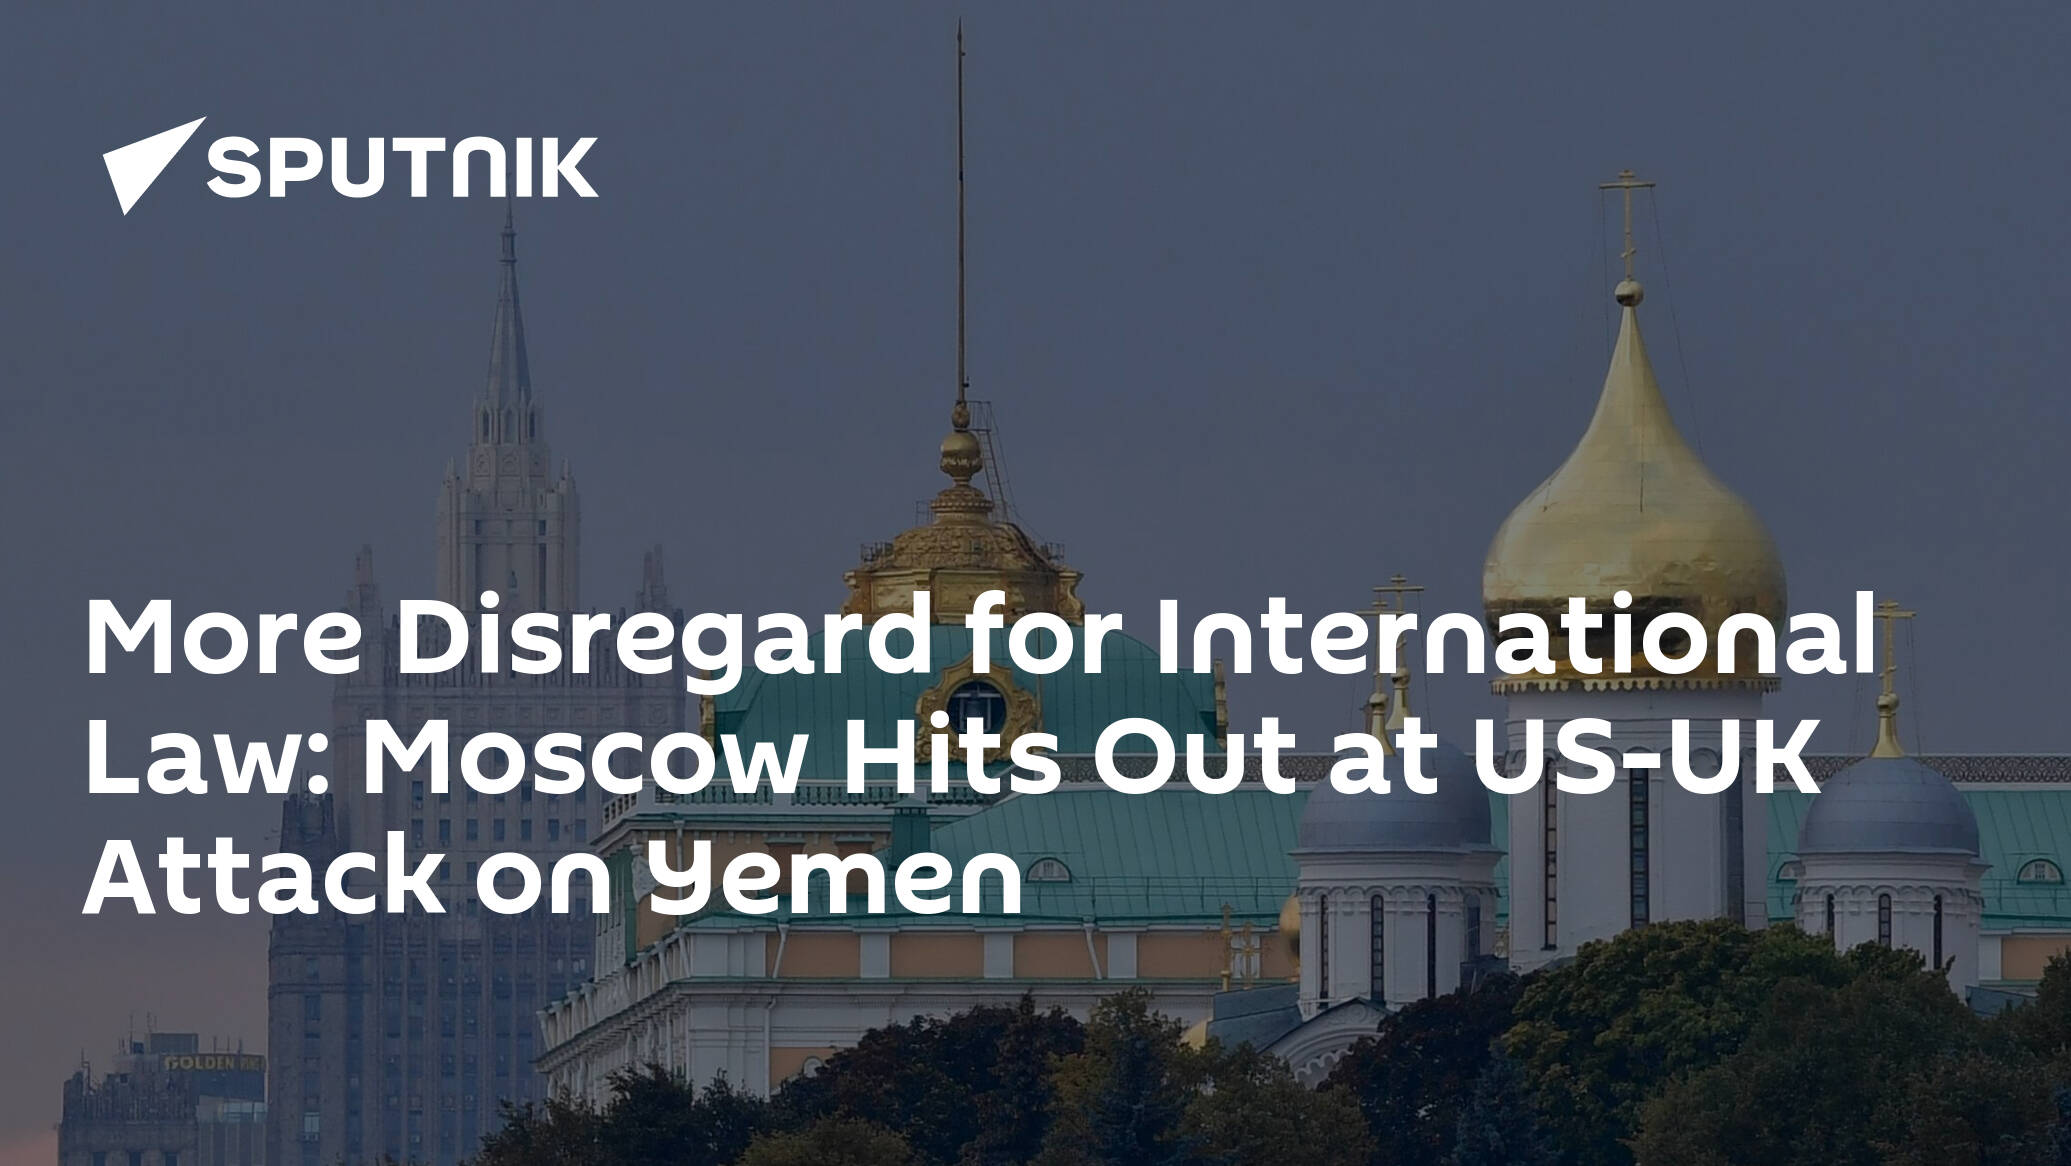 Strikes on Yemen are Another Example of Disregard for International Law – Moscow